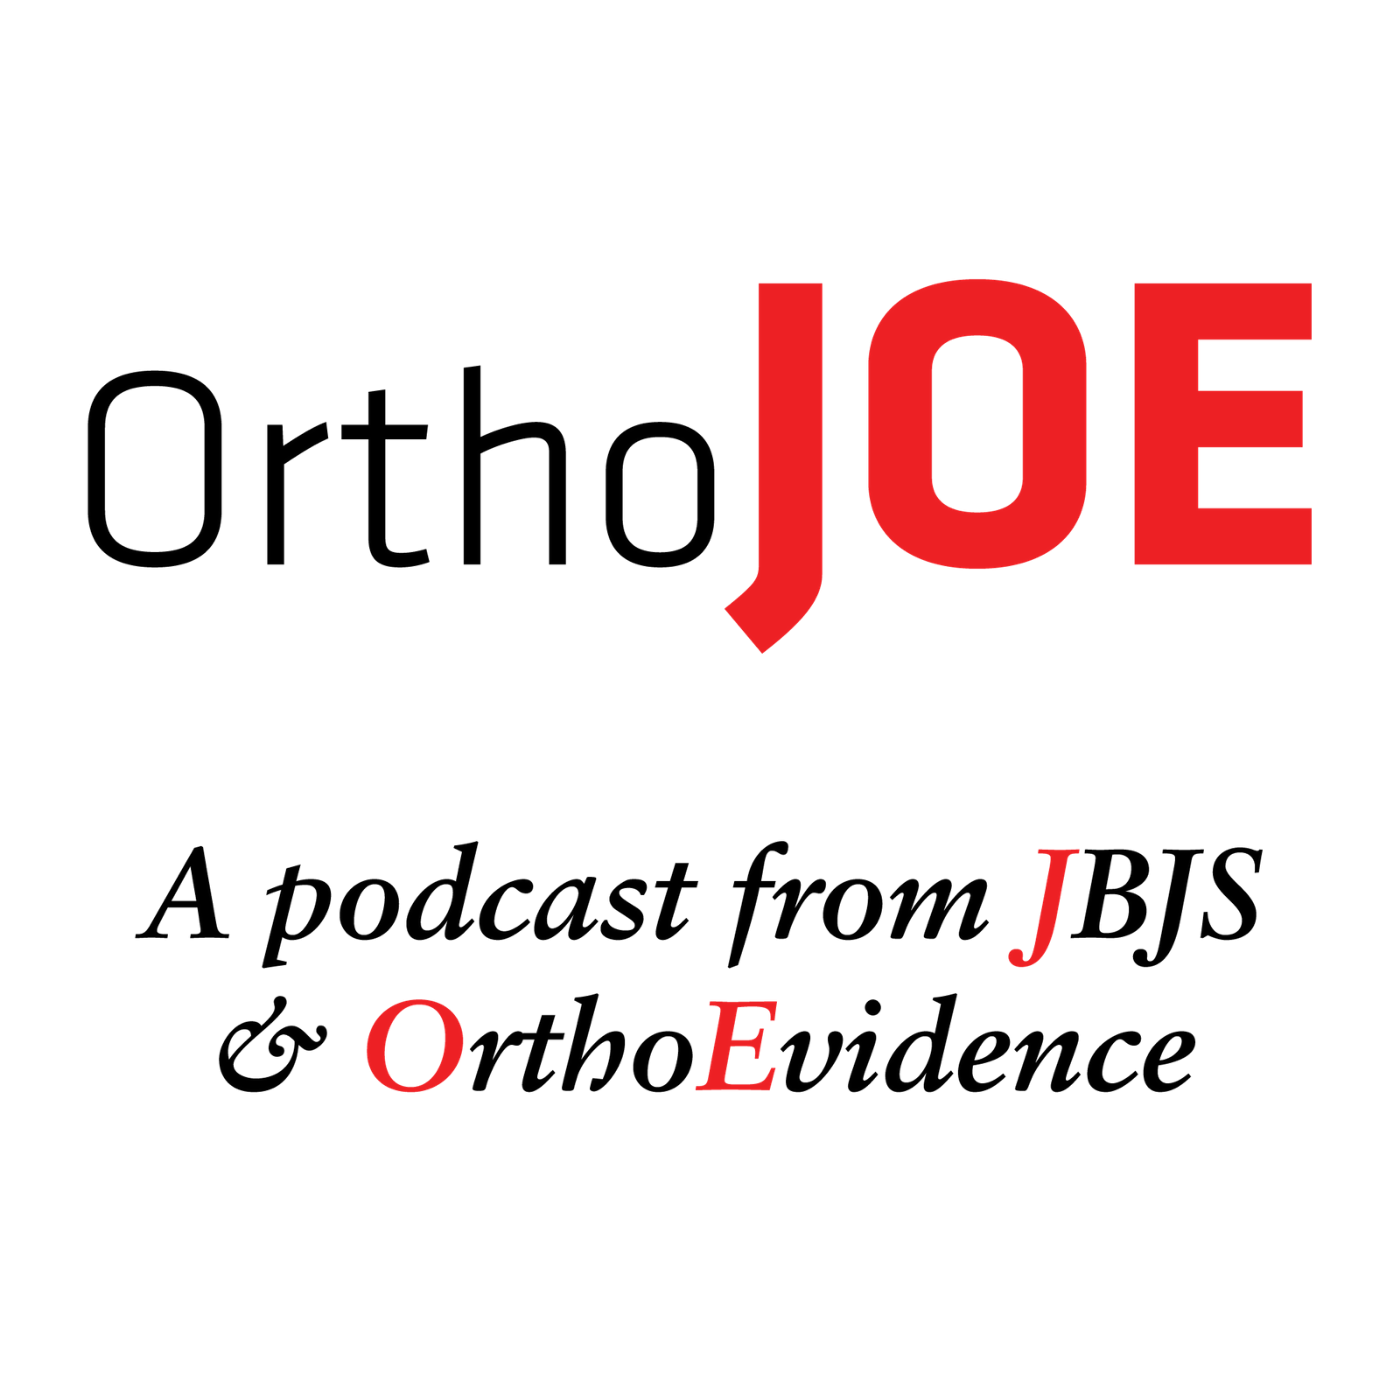 Current Evidence in Open Fracture Management, with special guest Gerard Slobogean